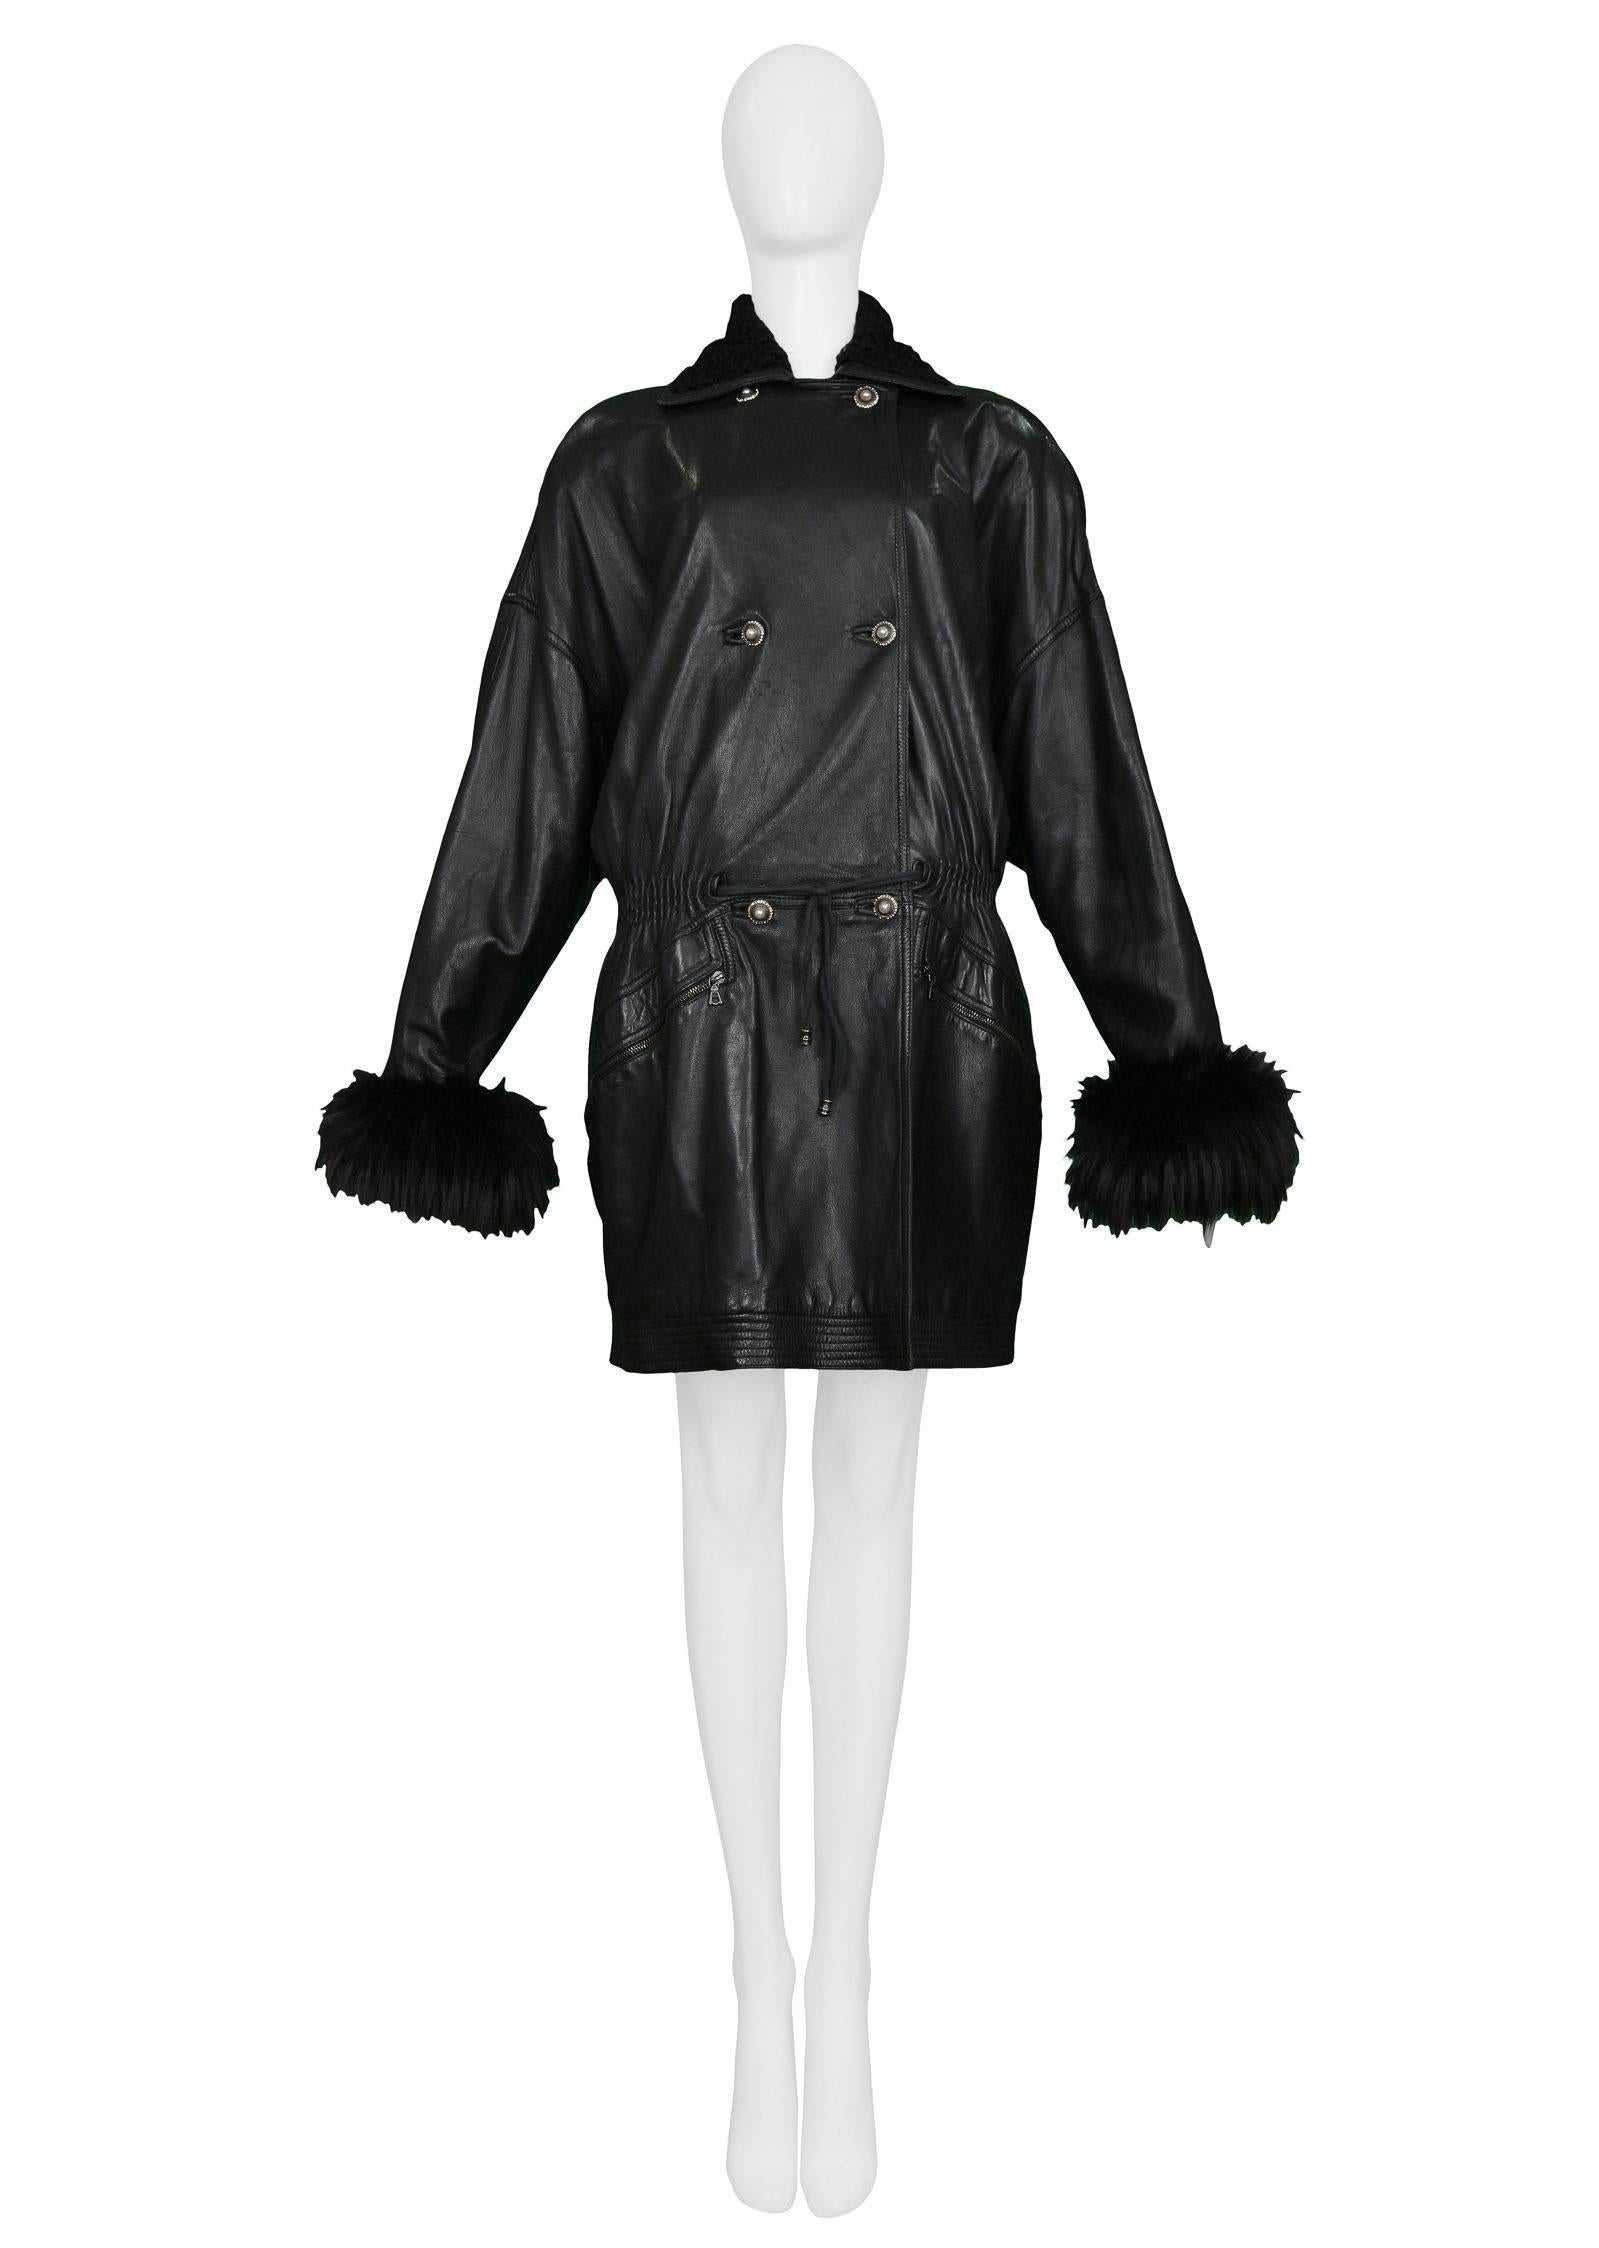 Vintage Gianni Versace black leather parka style coat with black fur cuffs and collar. The coat has a drawstring front waist, elastic back waist, soft shoulders, and decorative rhinestone buttons. Zipper pockets in front sides and quilted hem. Easy